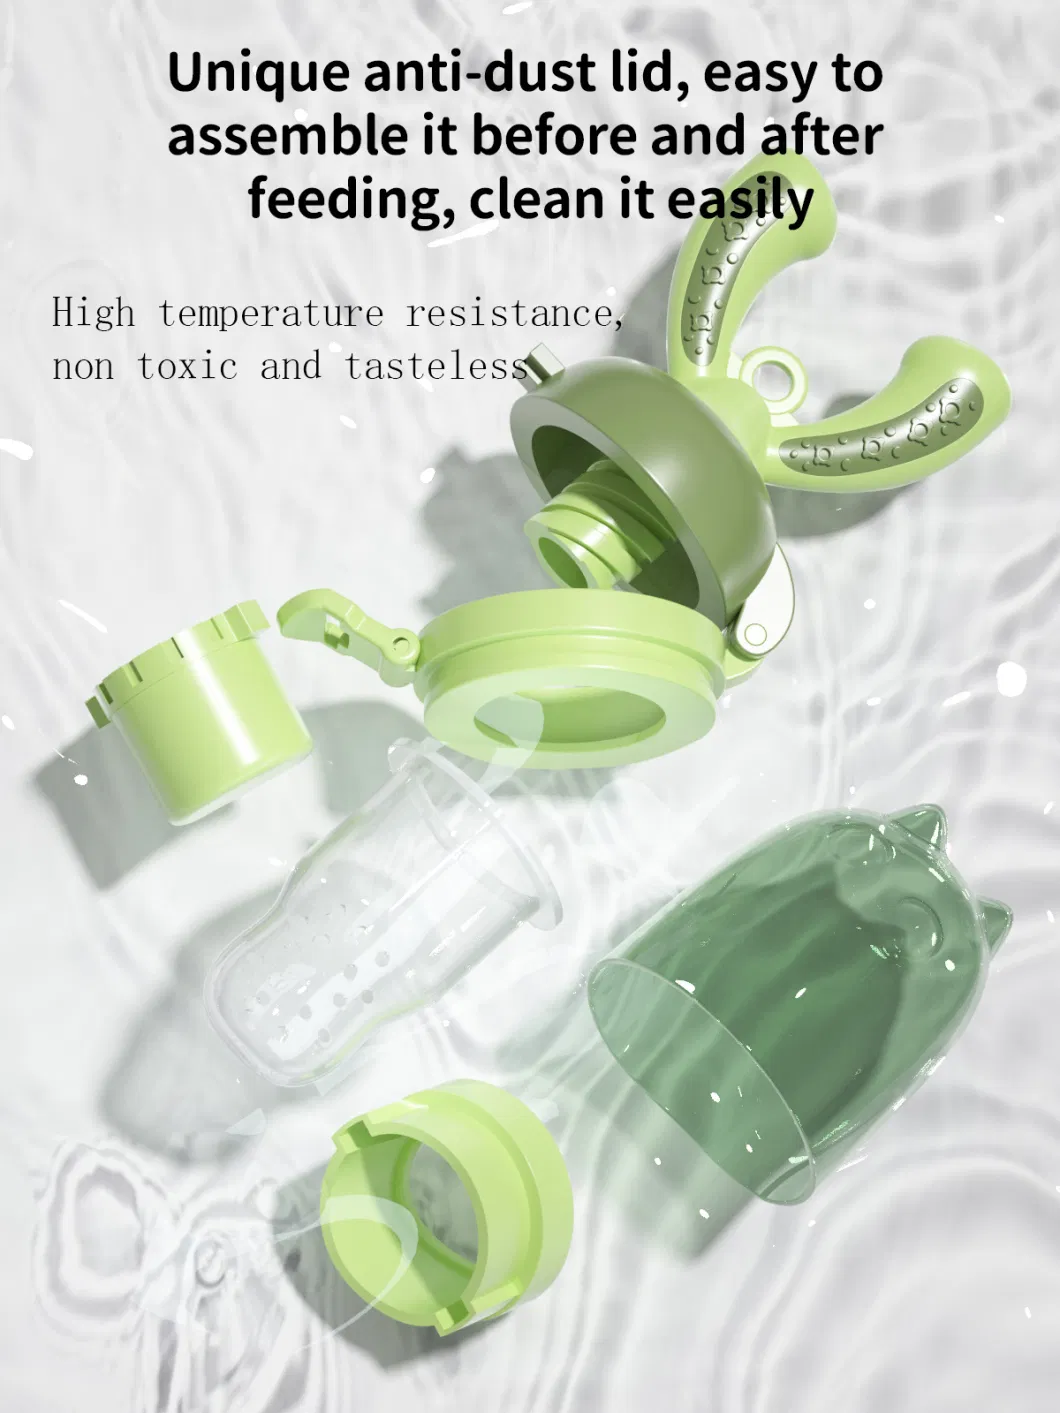 Infant Chewing Silicone Teether Toy Baby Fresh Fruit Feeder